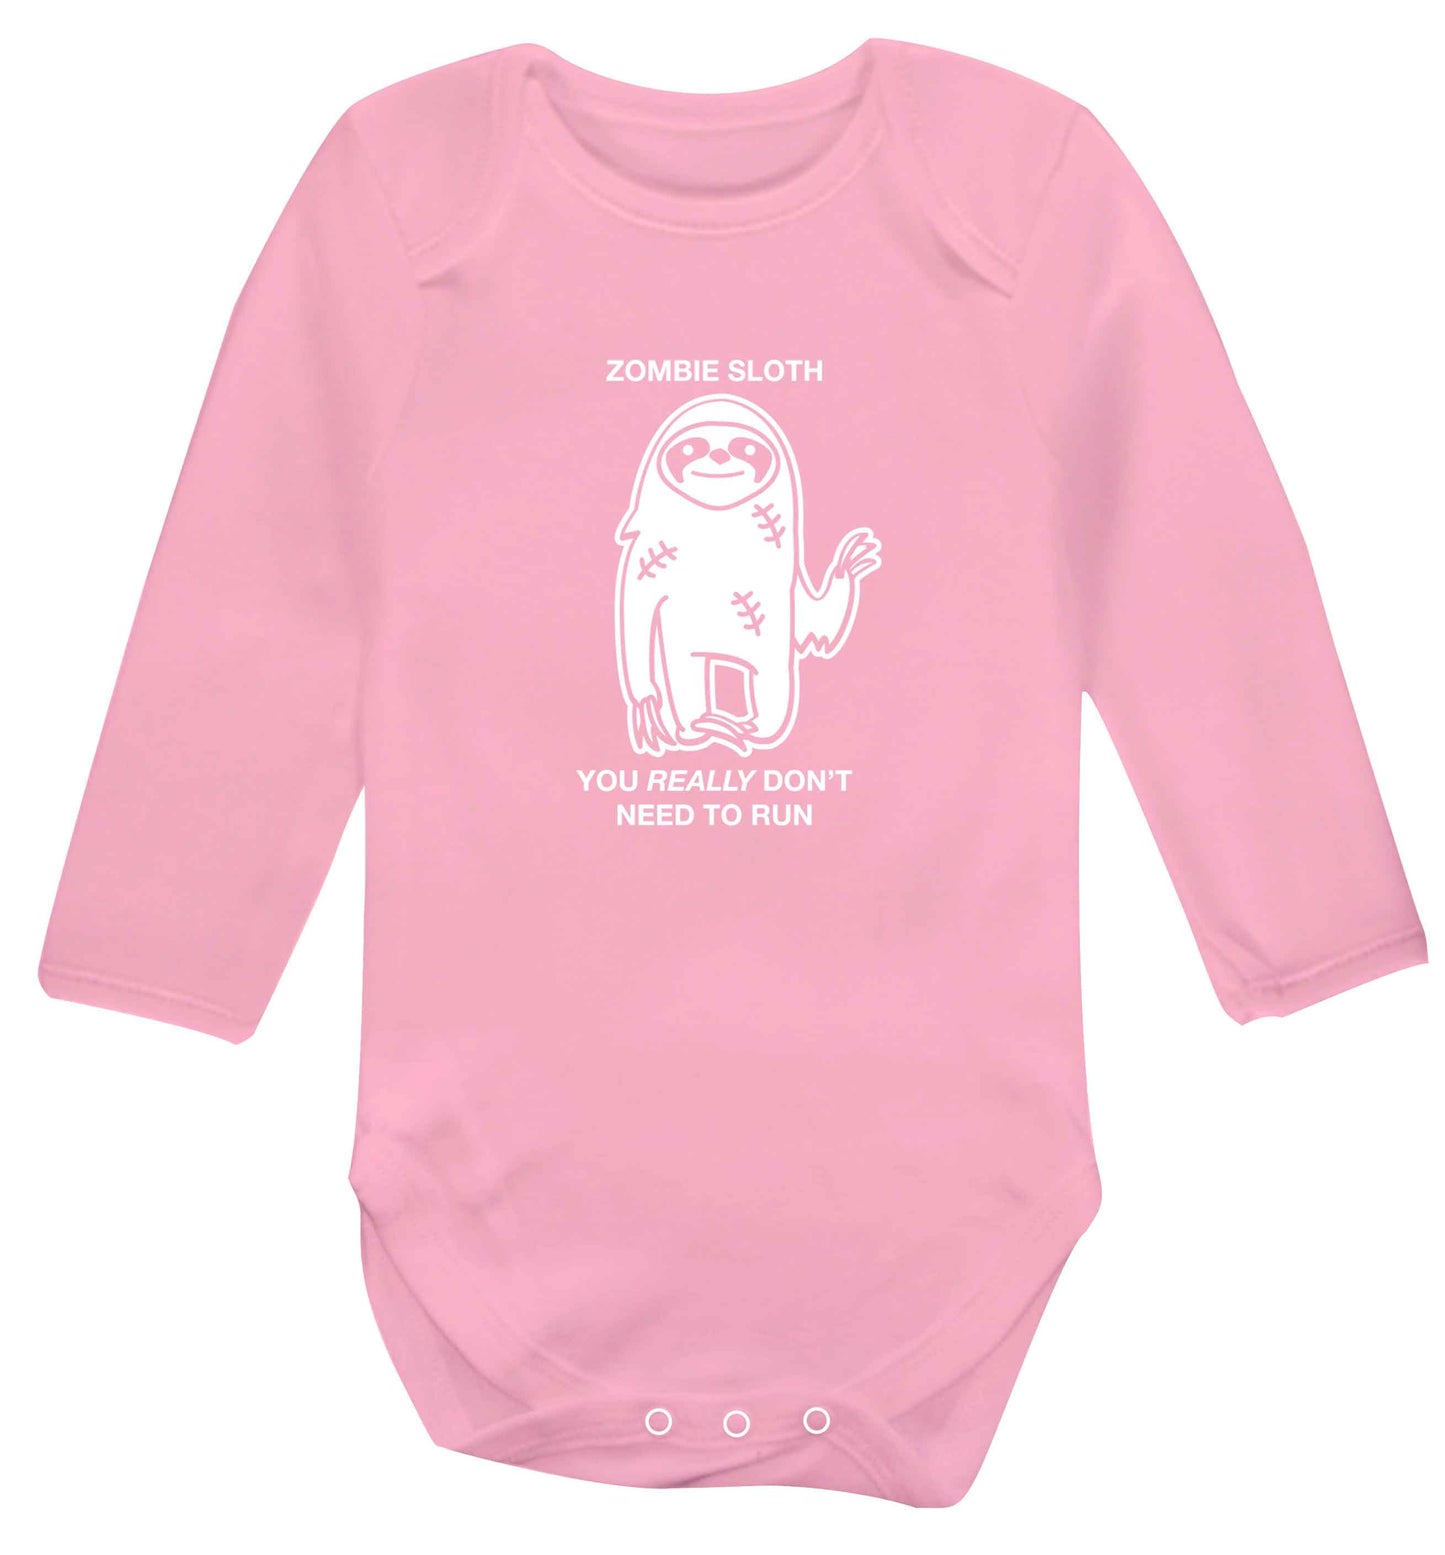 Zombie sloth you really don't need to run baby vest long sleeved pale pink 6-12 months